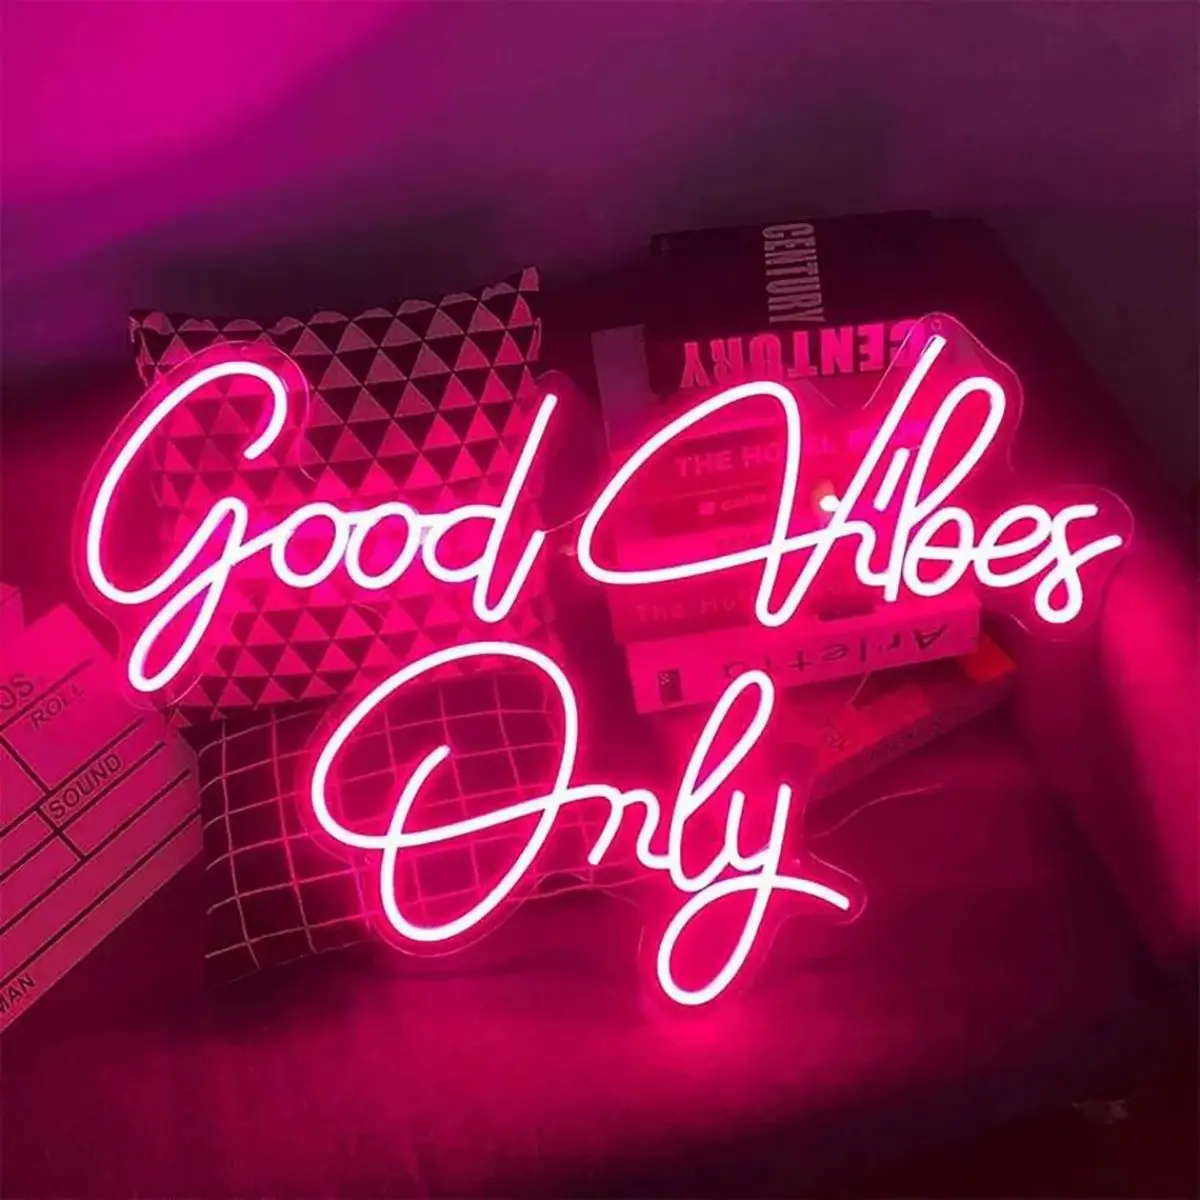 Good Vibes Only Neon Signs Fashion Led Neon Light Design For Living Bedroom Wall Decoration Wedding Children Room Deco